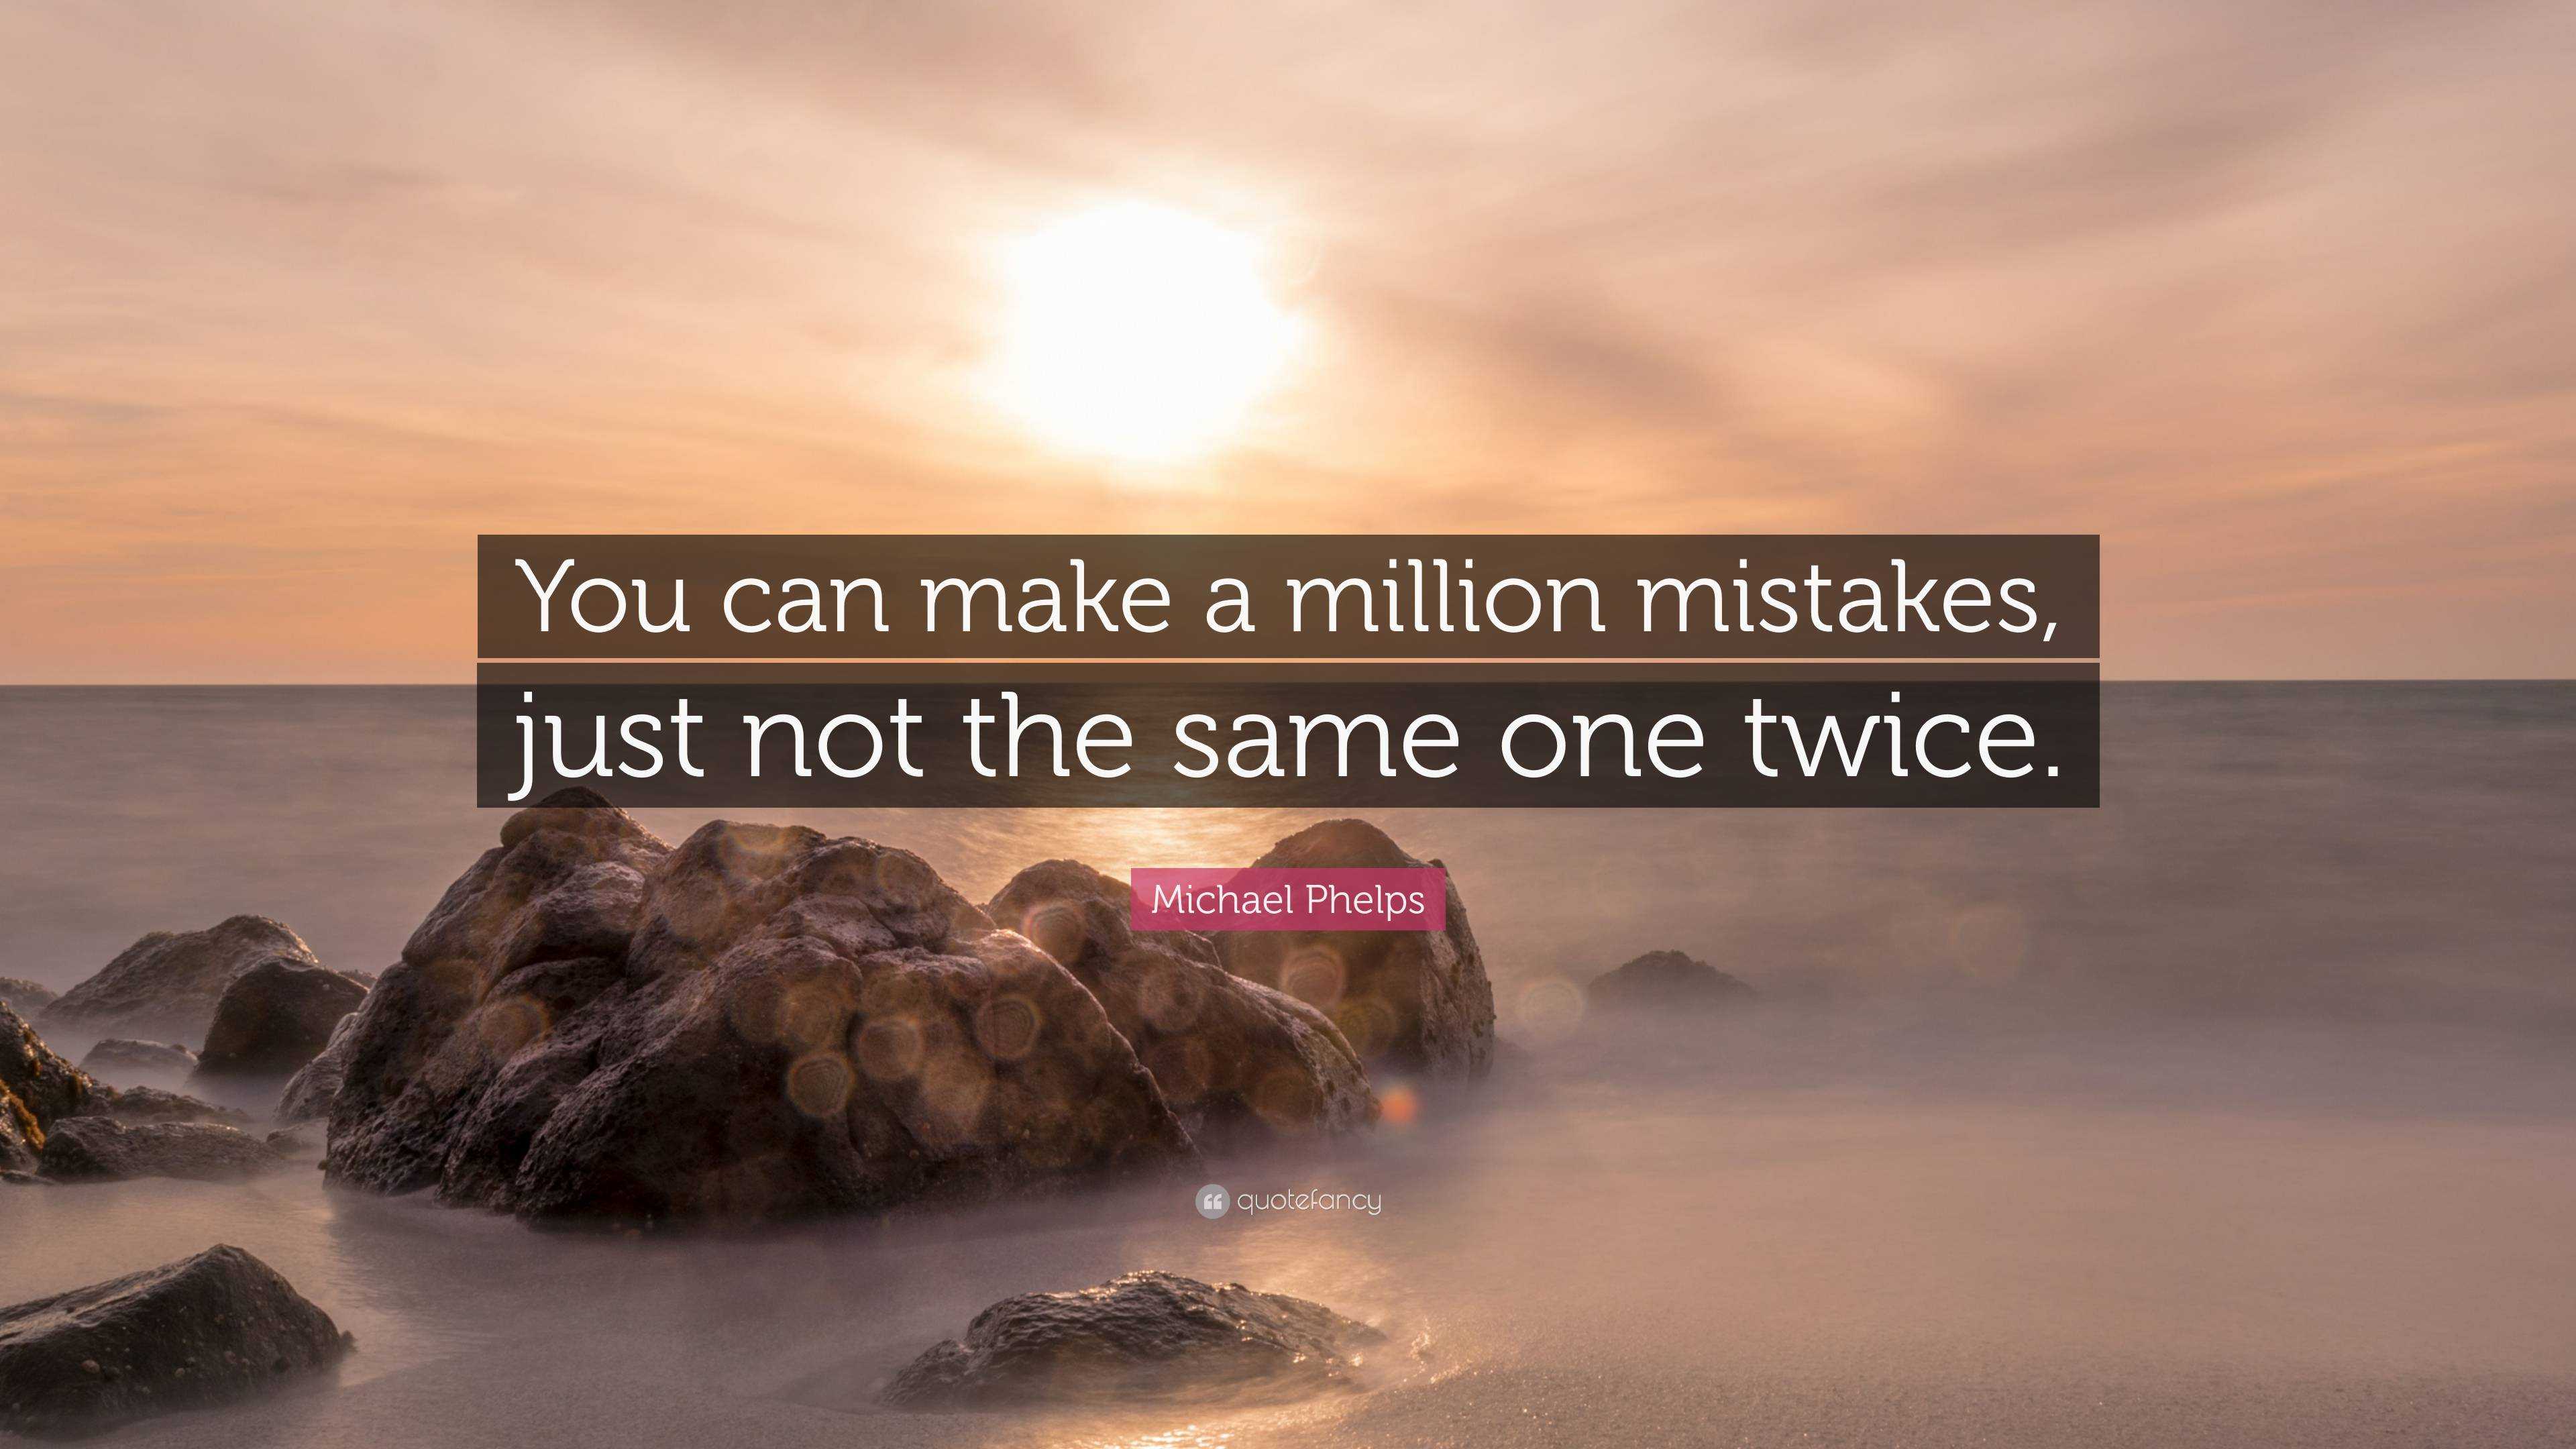 Michael Phelps Quote You Can Make A Million Mistakes Just Not The Same One Twice